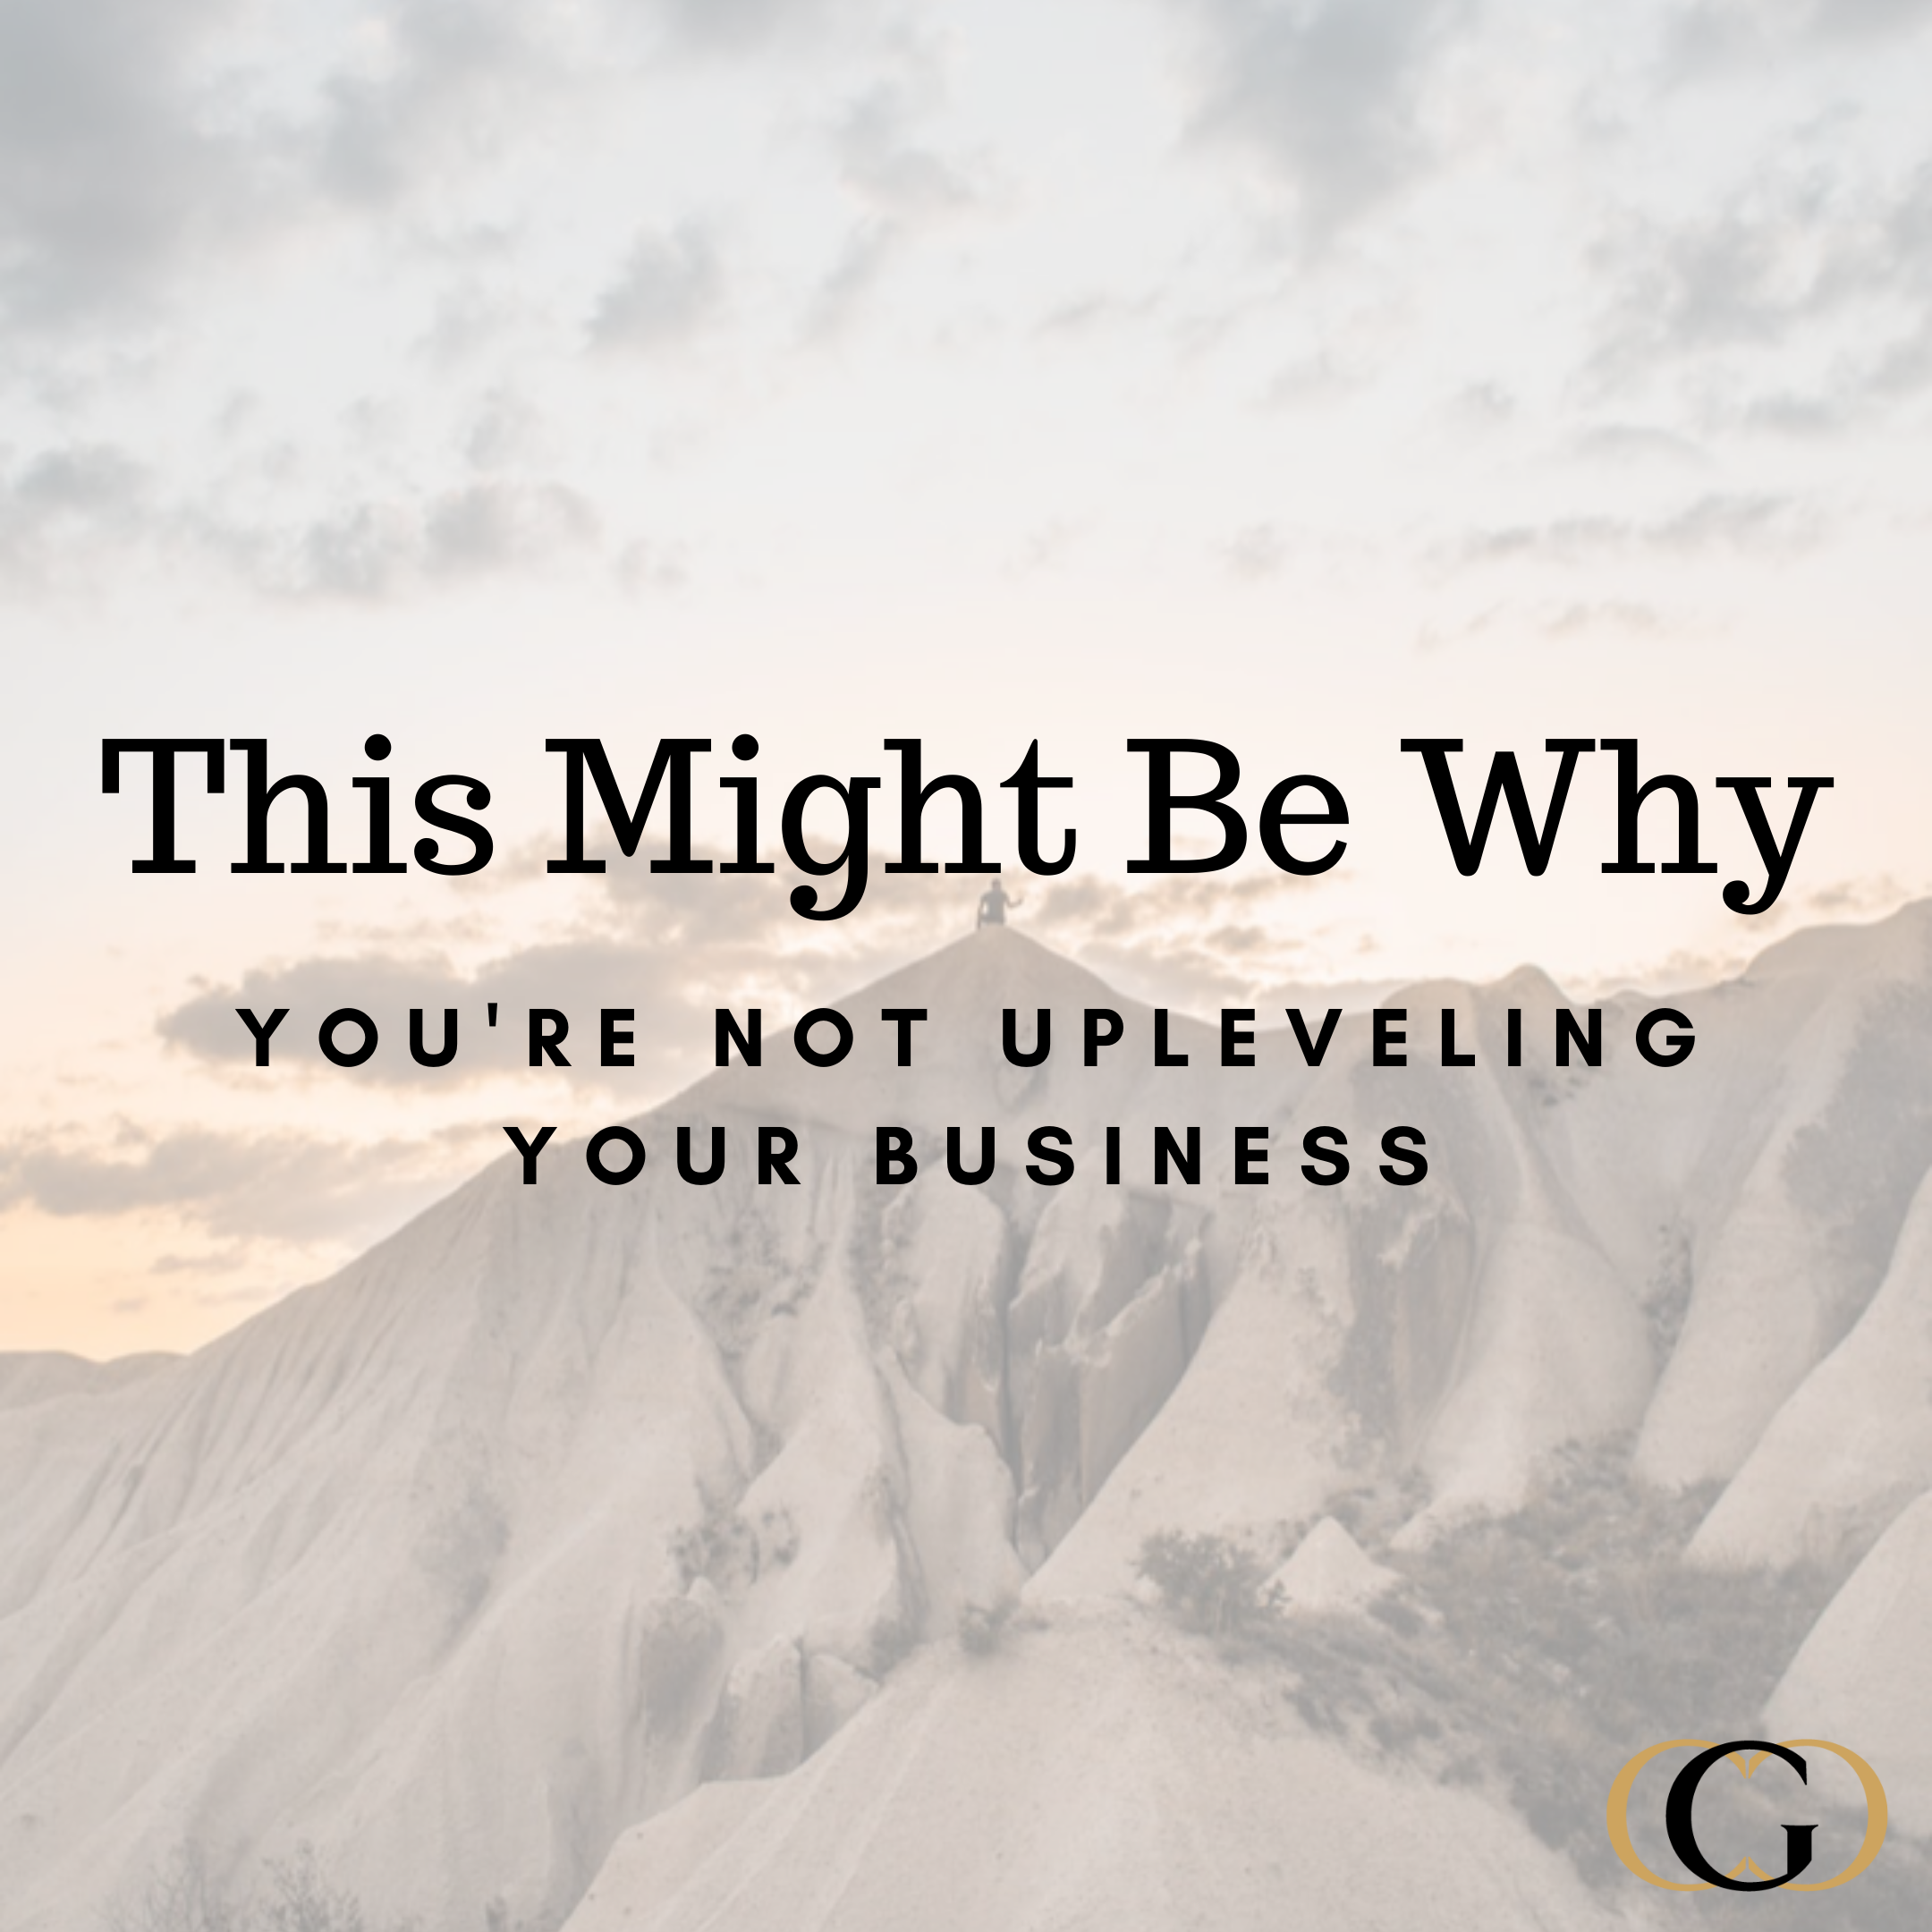 This Might Be Why You’re Not Upleveling Your Business